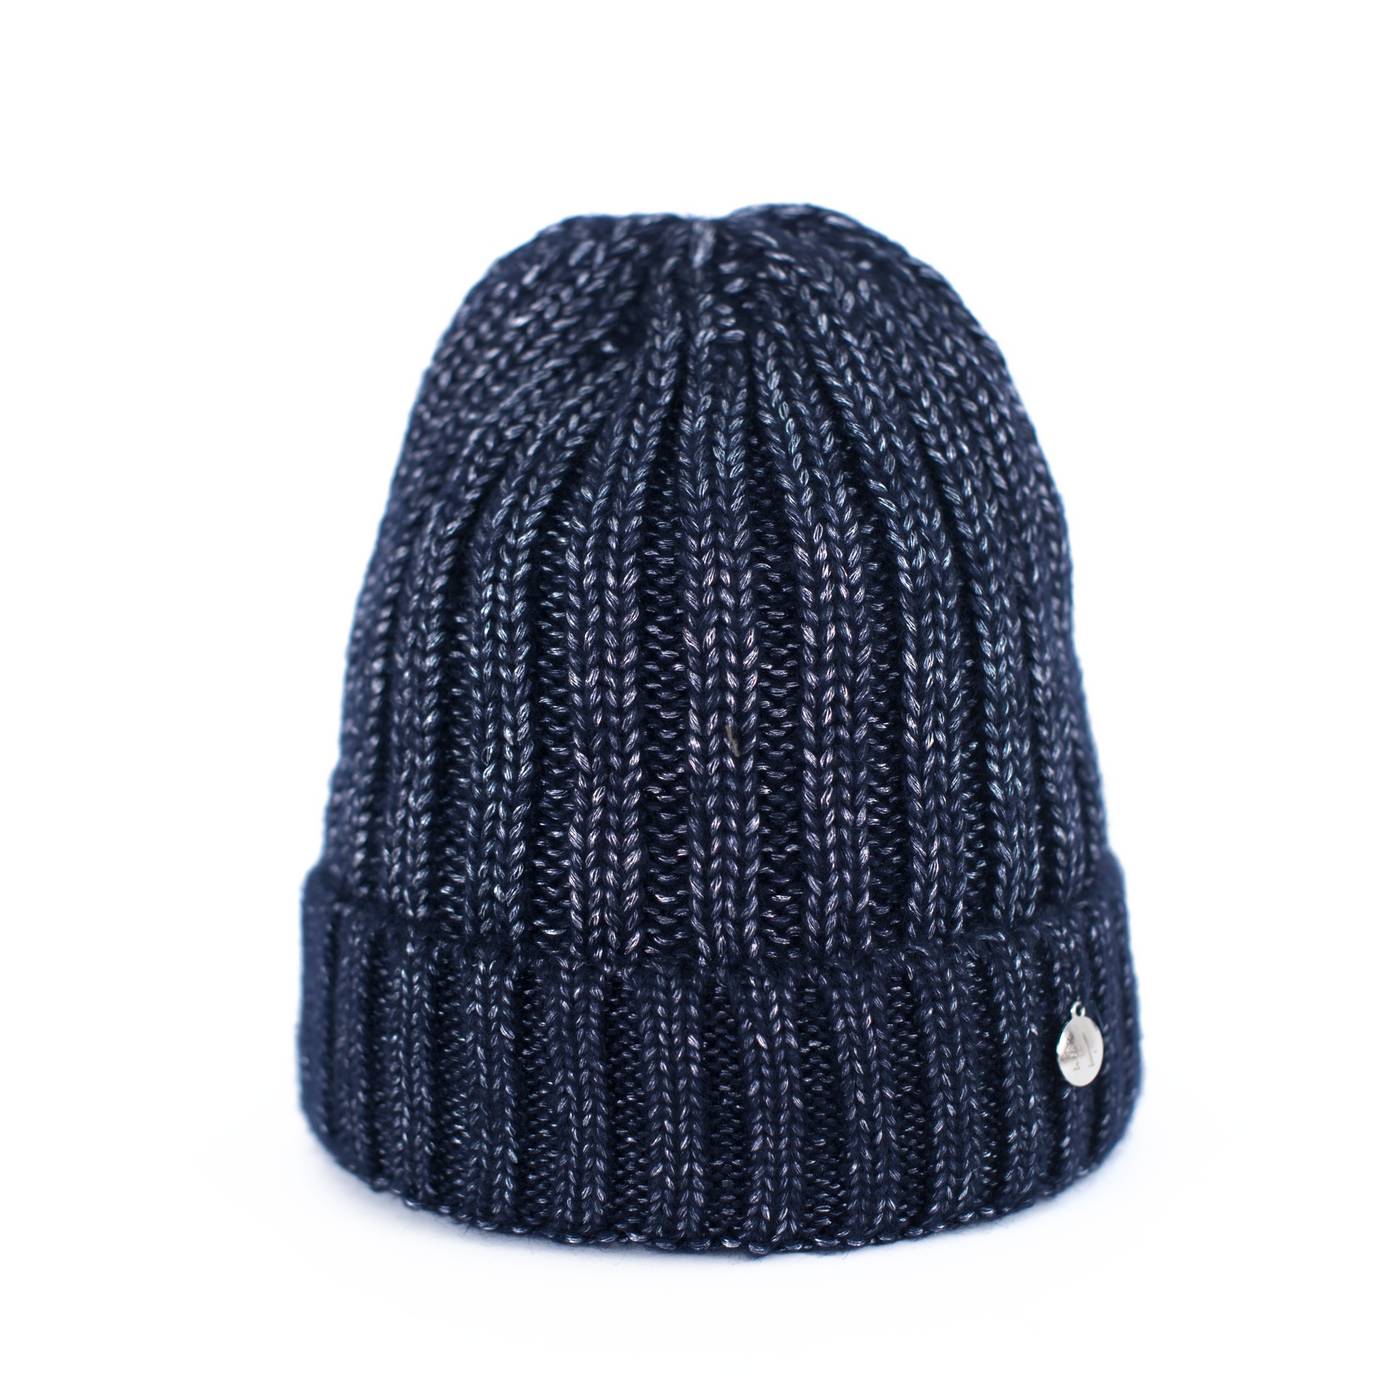 Art Of Polo Woman's Hat cz18379 Navy Blue